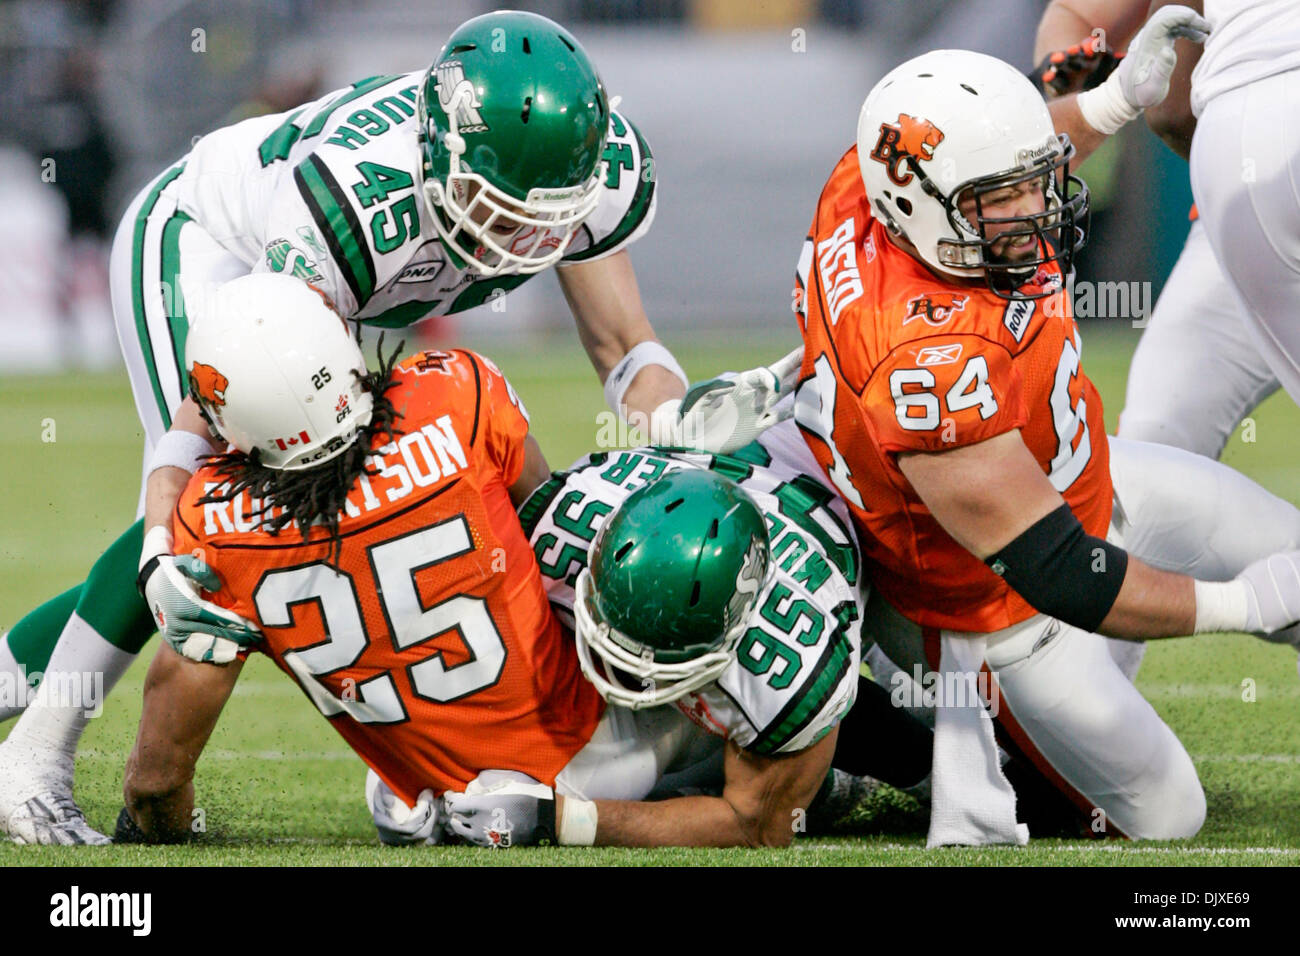 Oct. 31, 2010 - Vancouver, British Columbia, Canada - Lions #25 RB Jamal Robertson gets tackled by Roughriders #95 DE Luc Mullinder and #45 LB Mike McCullough during the sunday game at Empire field BC Lions won the game with a score of 23 to 17 against the Saskatchewan Roughriders for their last home game of the season (Credit Image: © James Healey/Southcreek Global/ZUMApress.com) Stock Photo